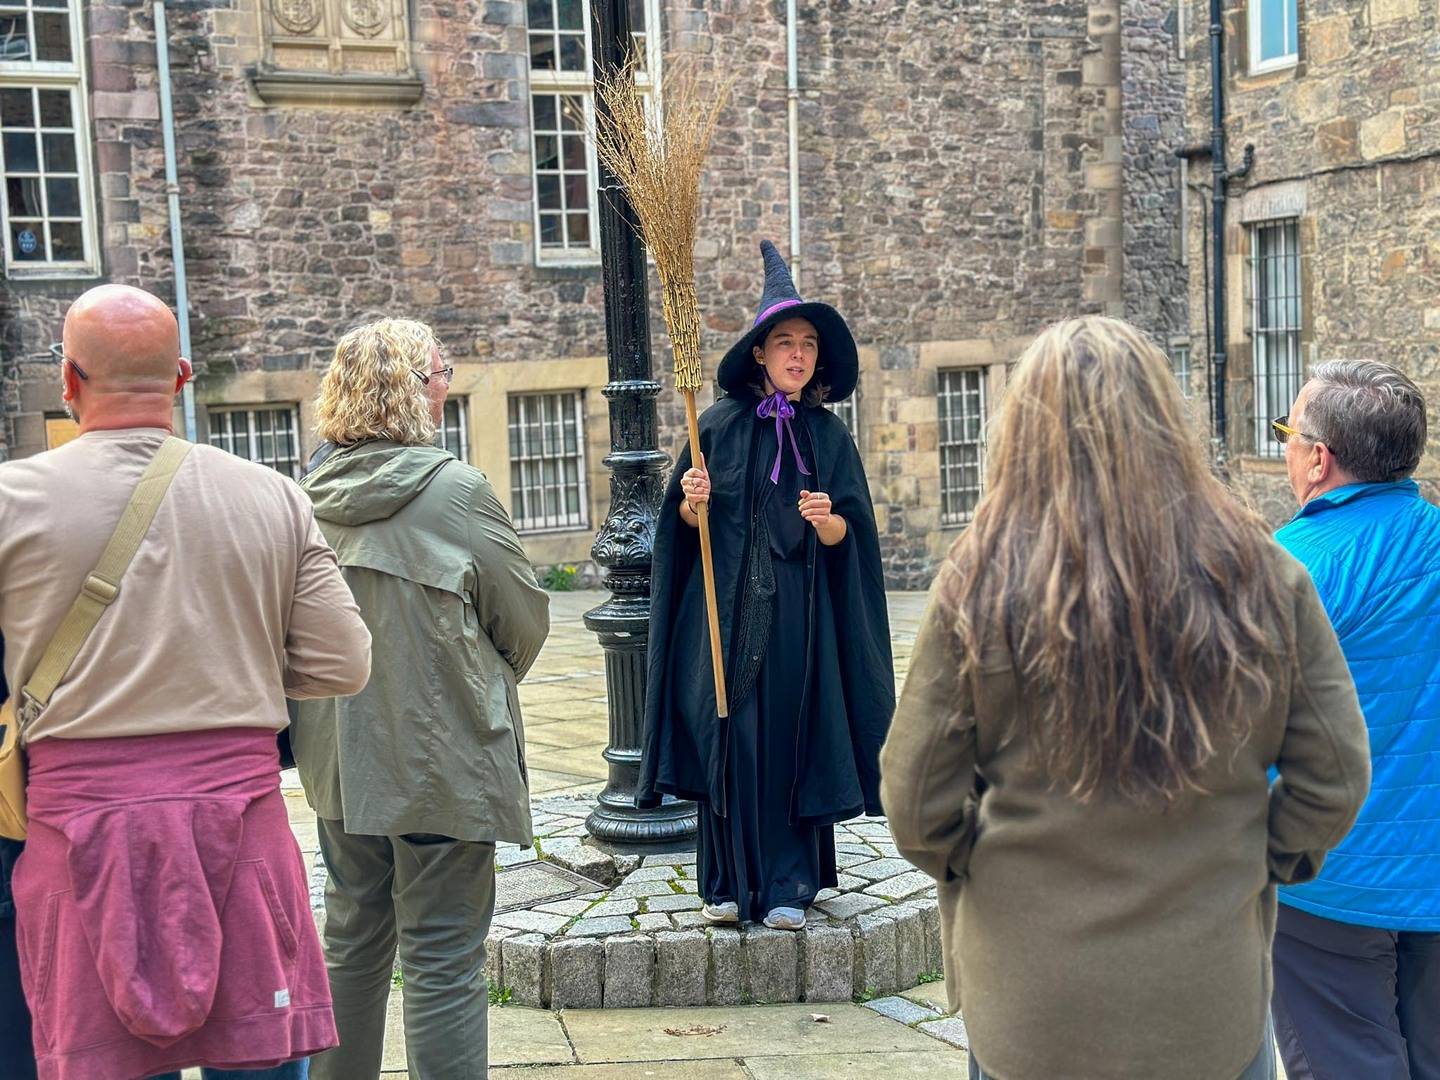 Witch guide with black pointy hat and broomstick, in a courtyard in the old town of edinburgh. Under an old style lampost.